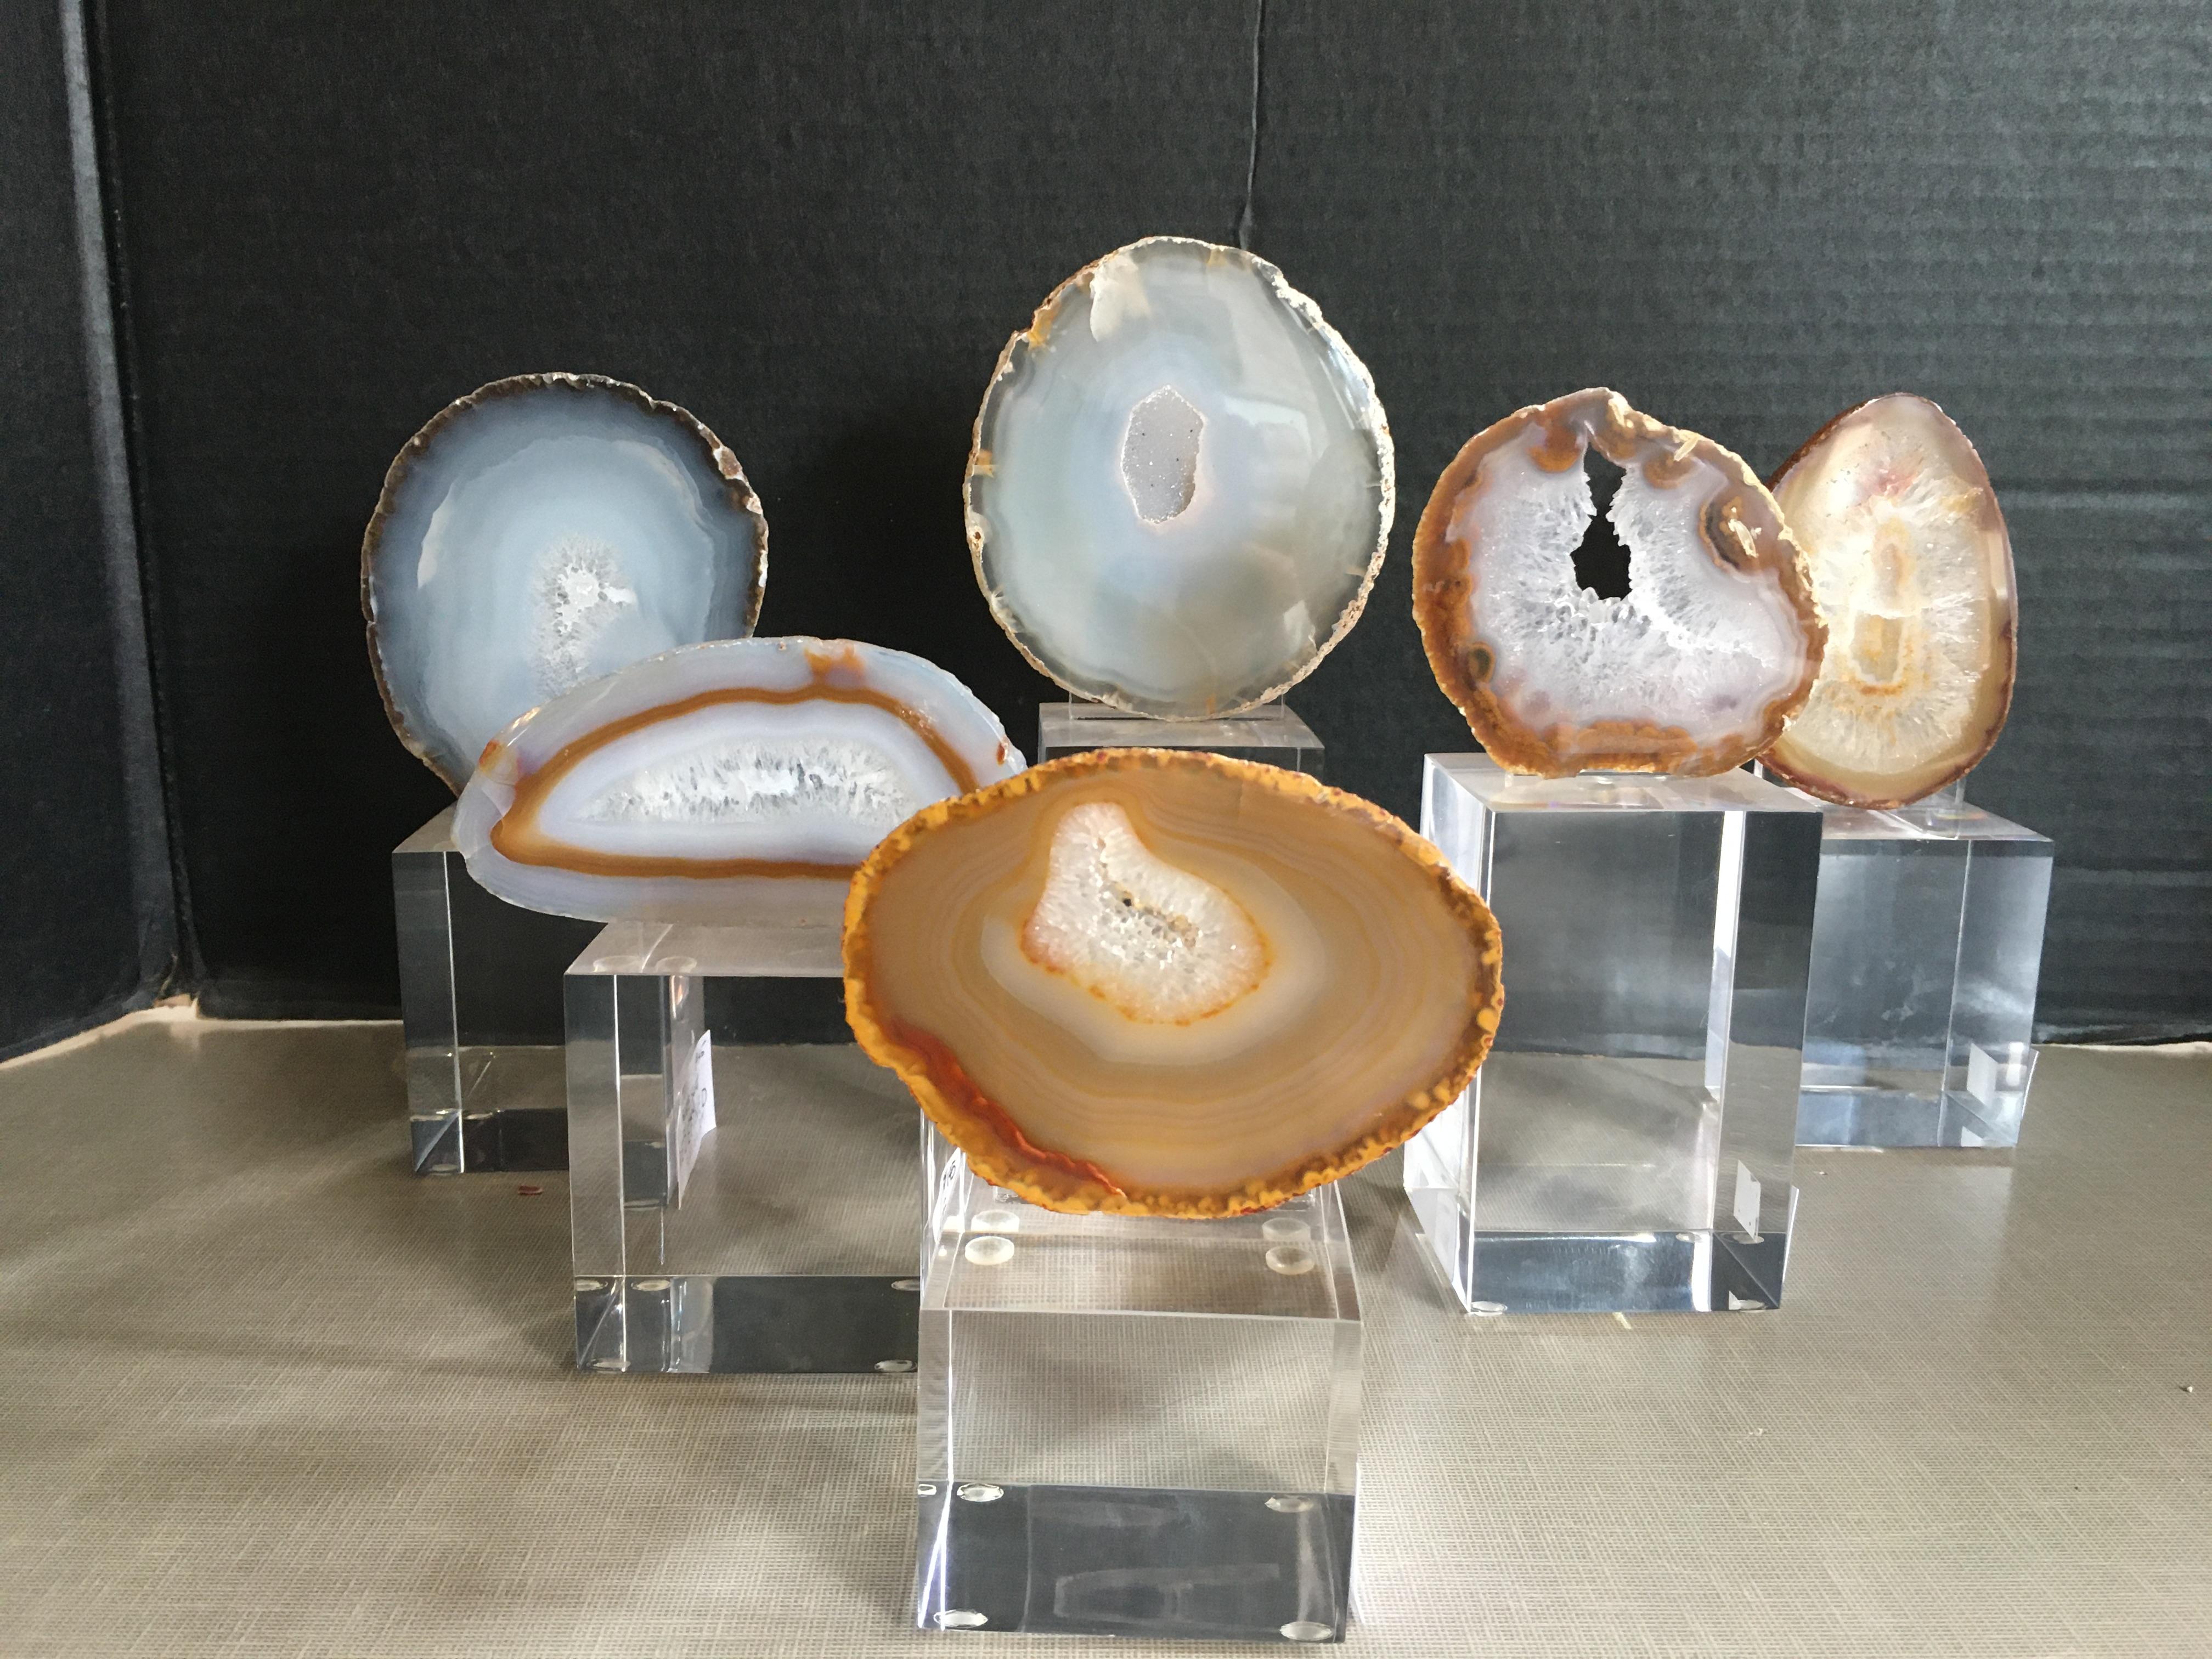 A collection of agate slices mounted on Lucite.